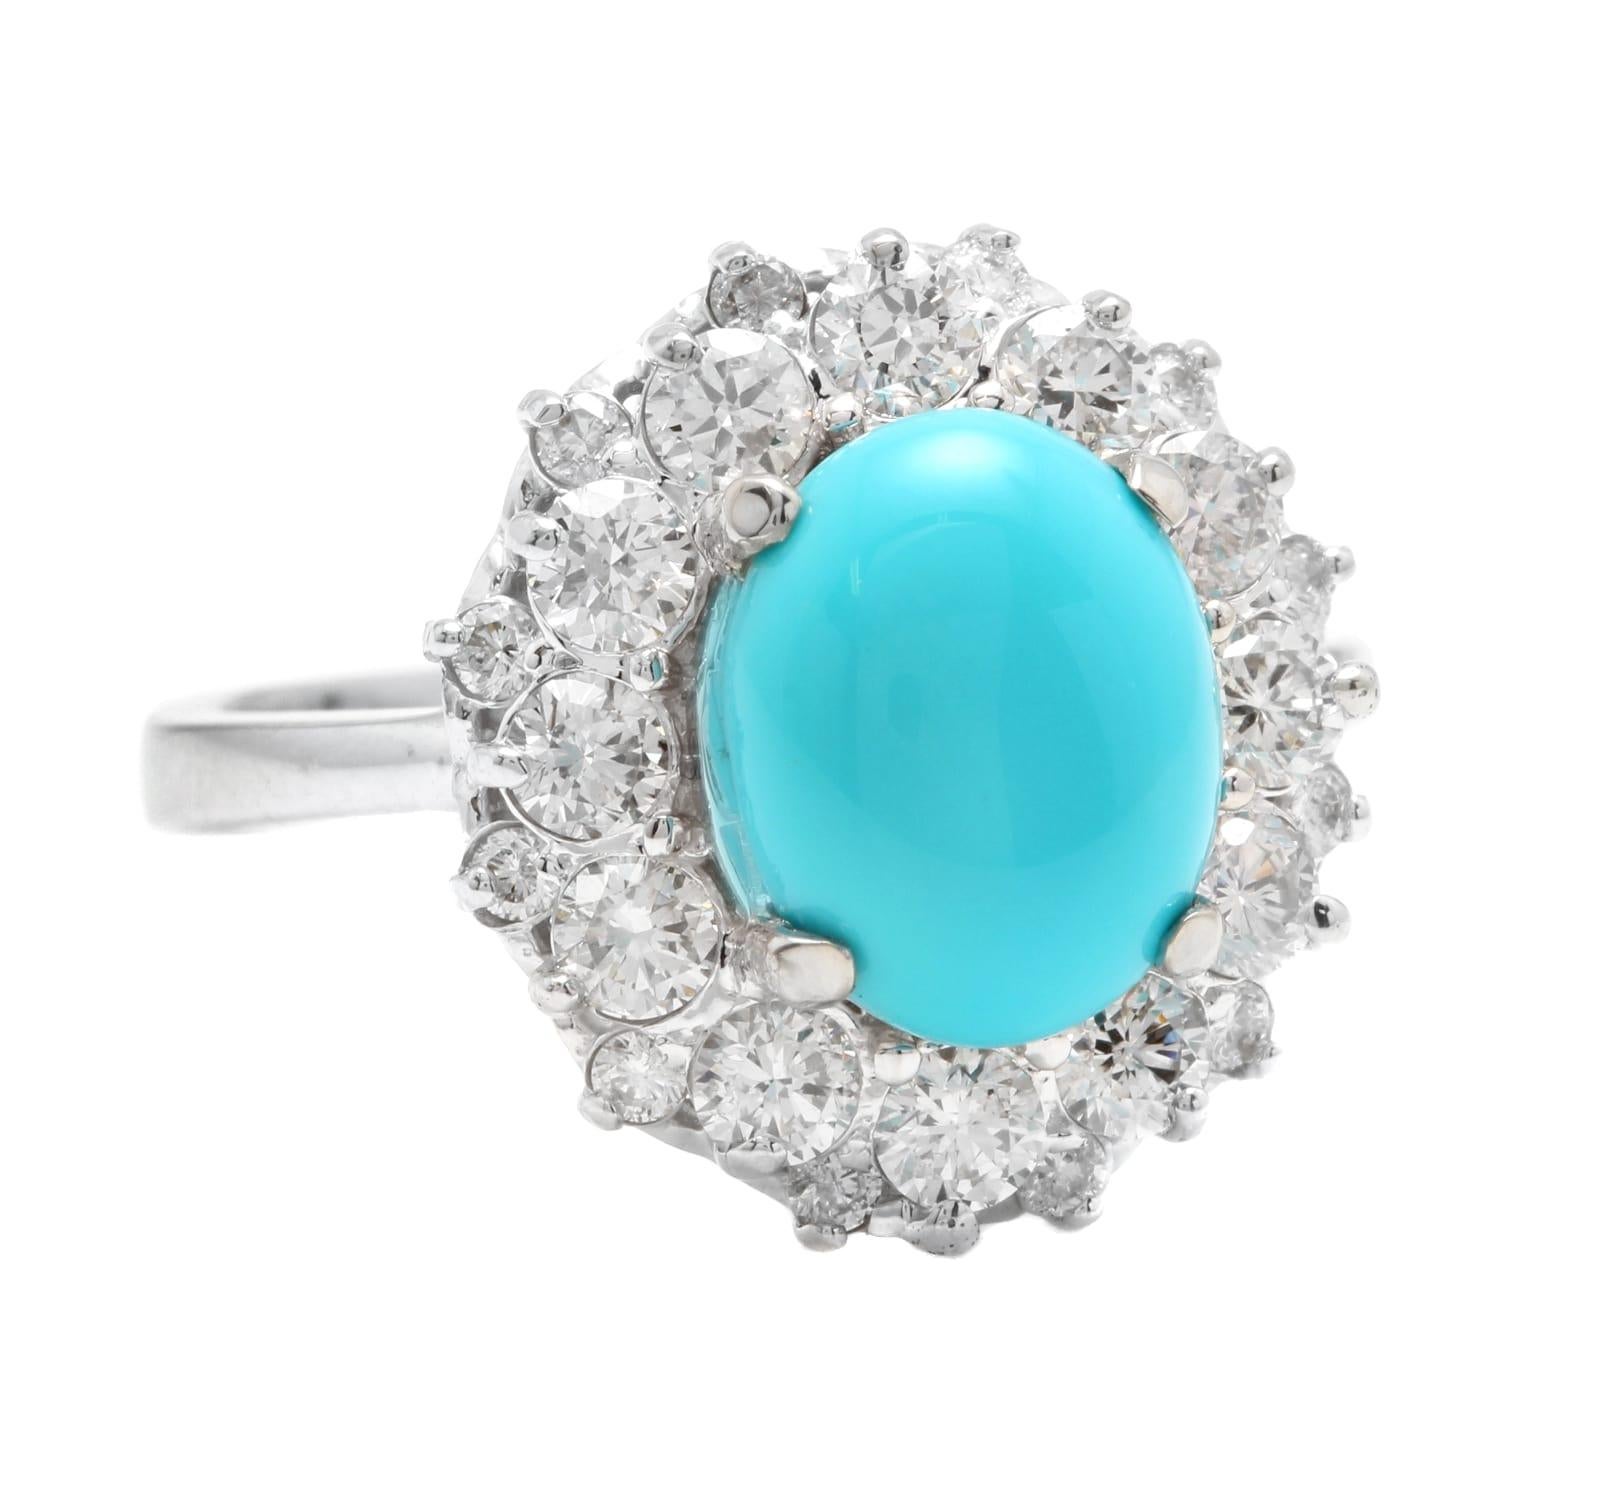 3.50 Carats Impressive Natural Turquoise and Diamond 14K White Gold Ring

Suggested Replacement Value $7,400.00

Total Natural Oval Turquoise Weight is: Approx. 2.20 Carats

Turquoise Measures: 10.00 x 8.00mm

Natural Round Diamonds Weight: Approx.